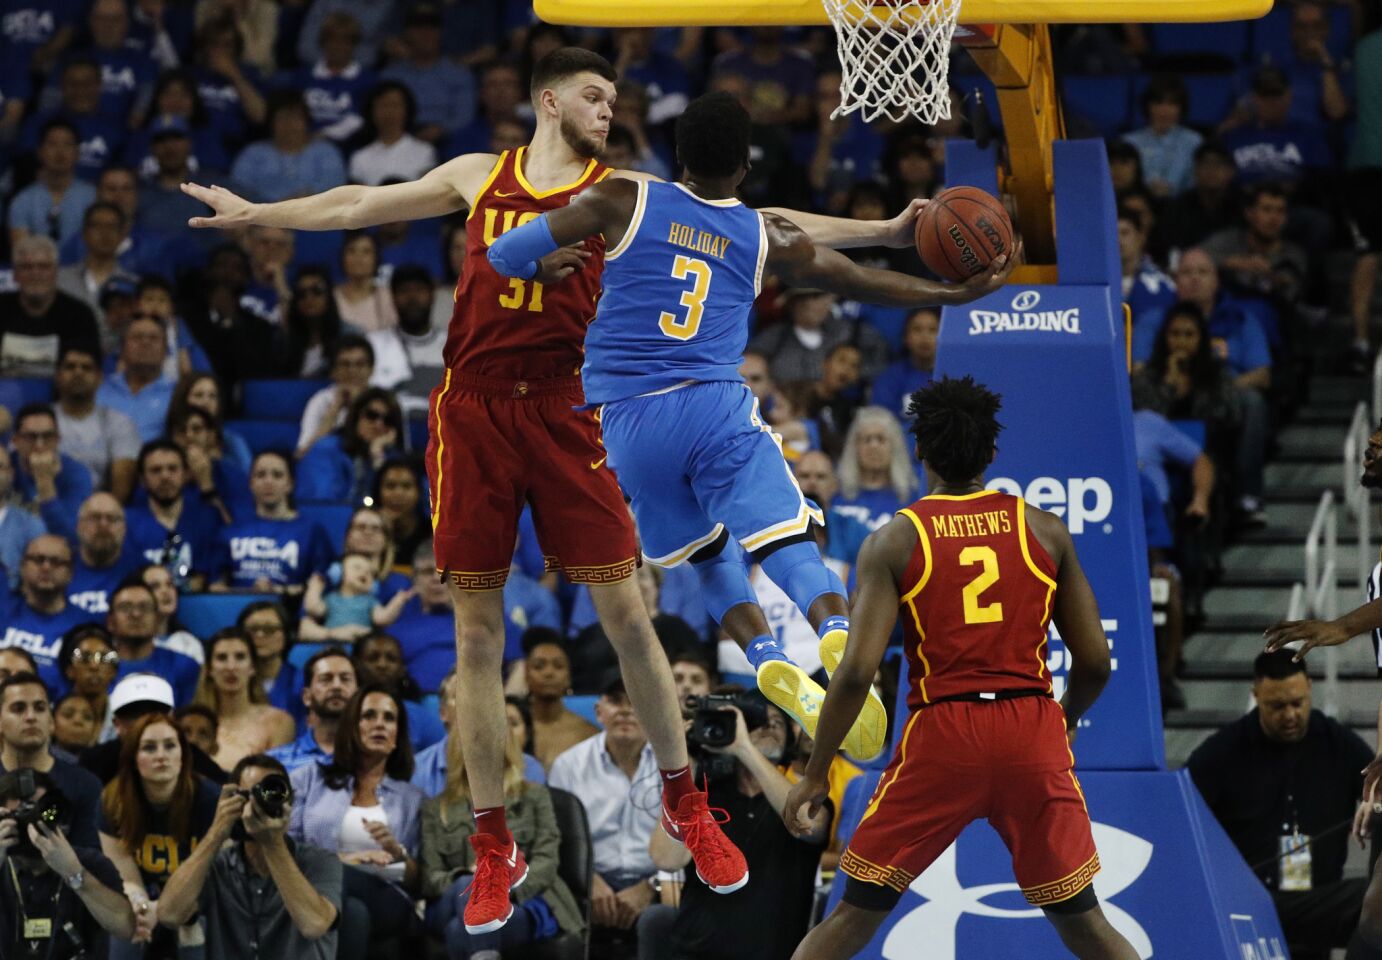 USC forward Nick Rakocevic (31) goes for the bock on UCLA guard Aaron Holiday (3) in the second half at Pauley Pavilion on Saturday.